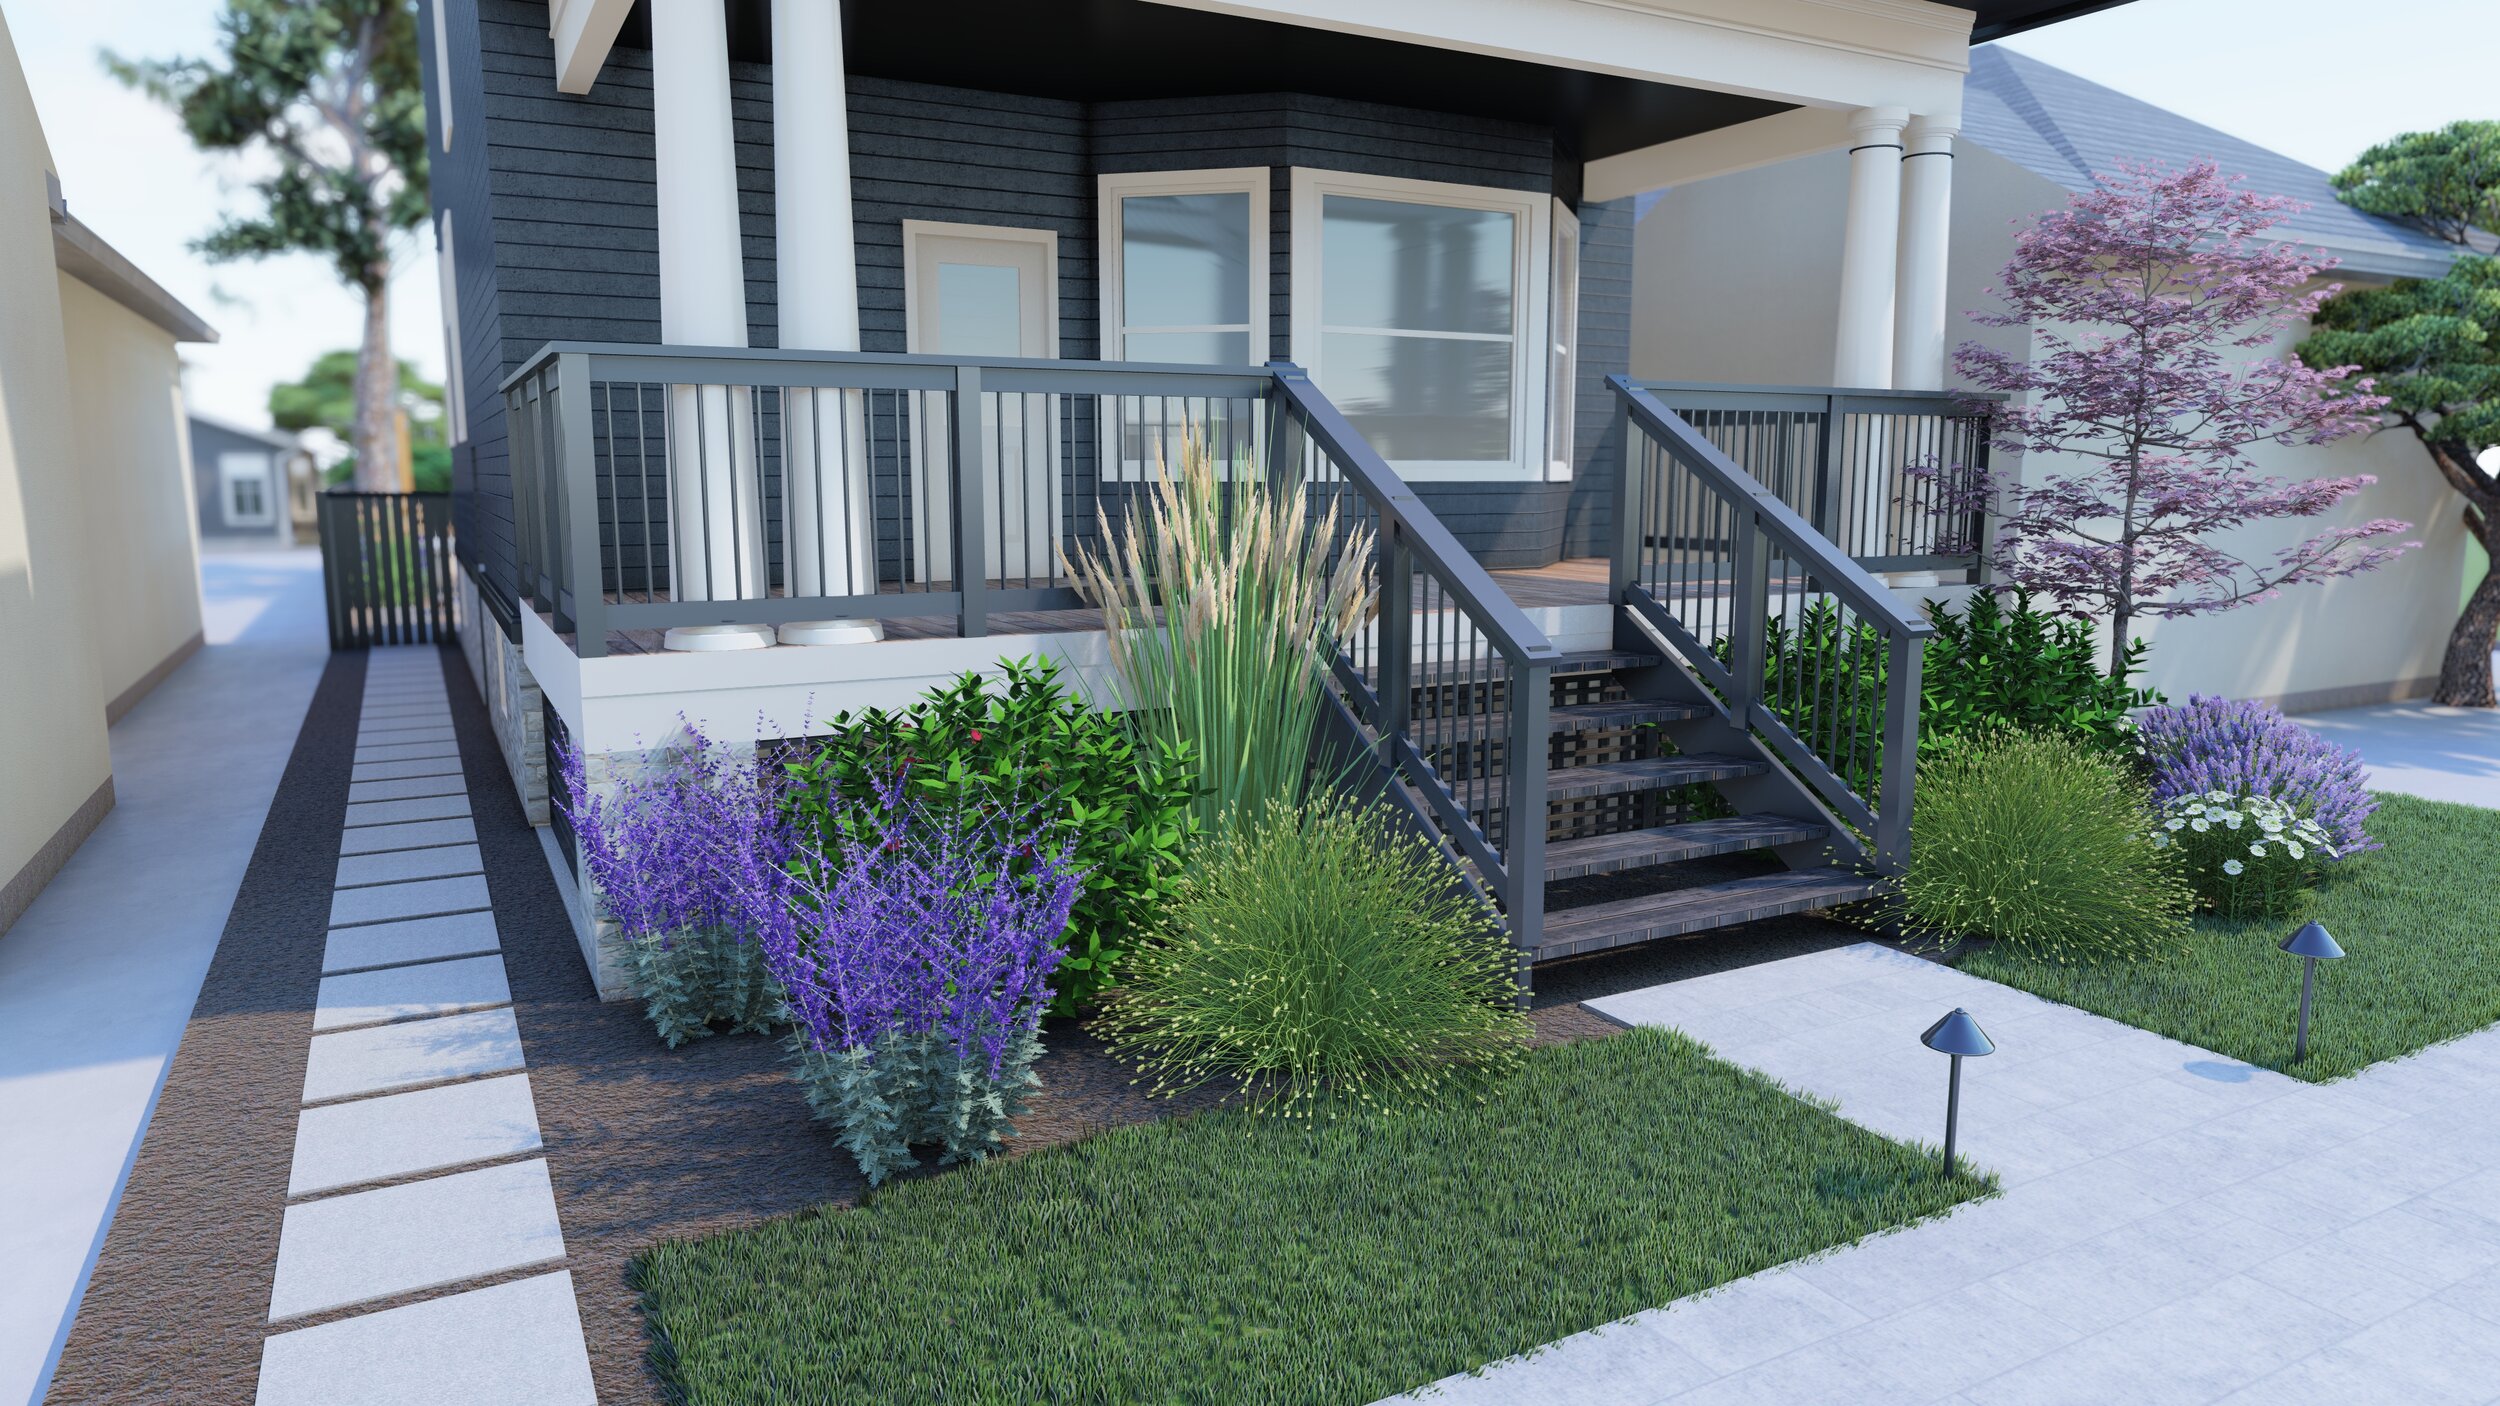 Front yard view of blue home exterior with white trim and lush plantings around porch and paver pathway to side yard